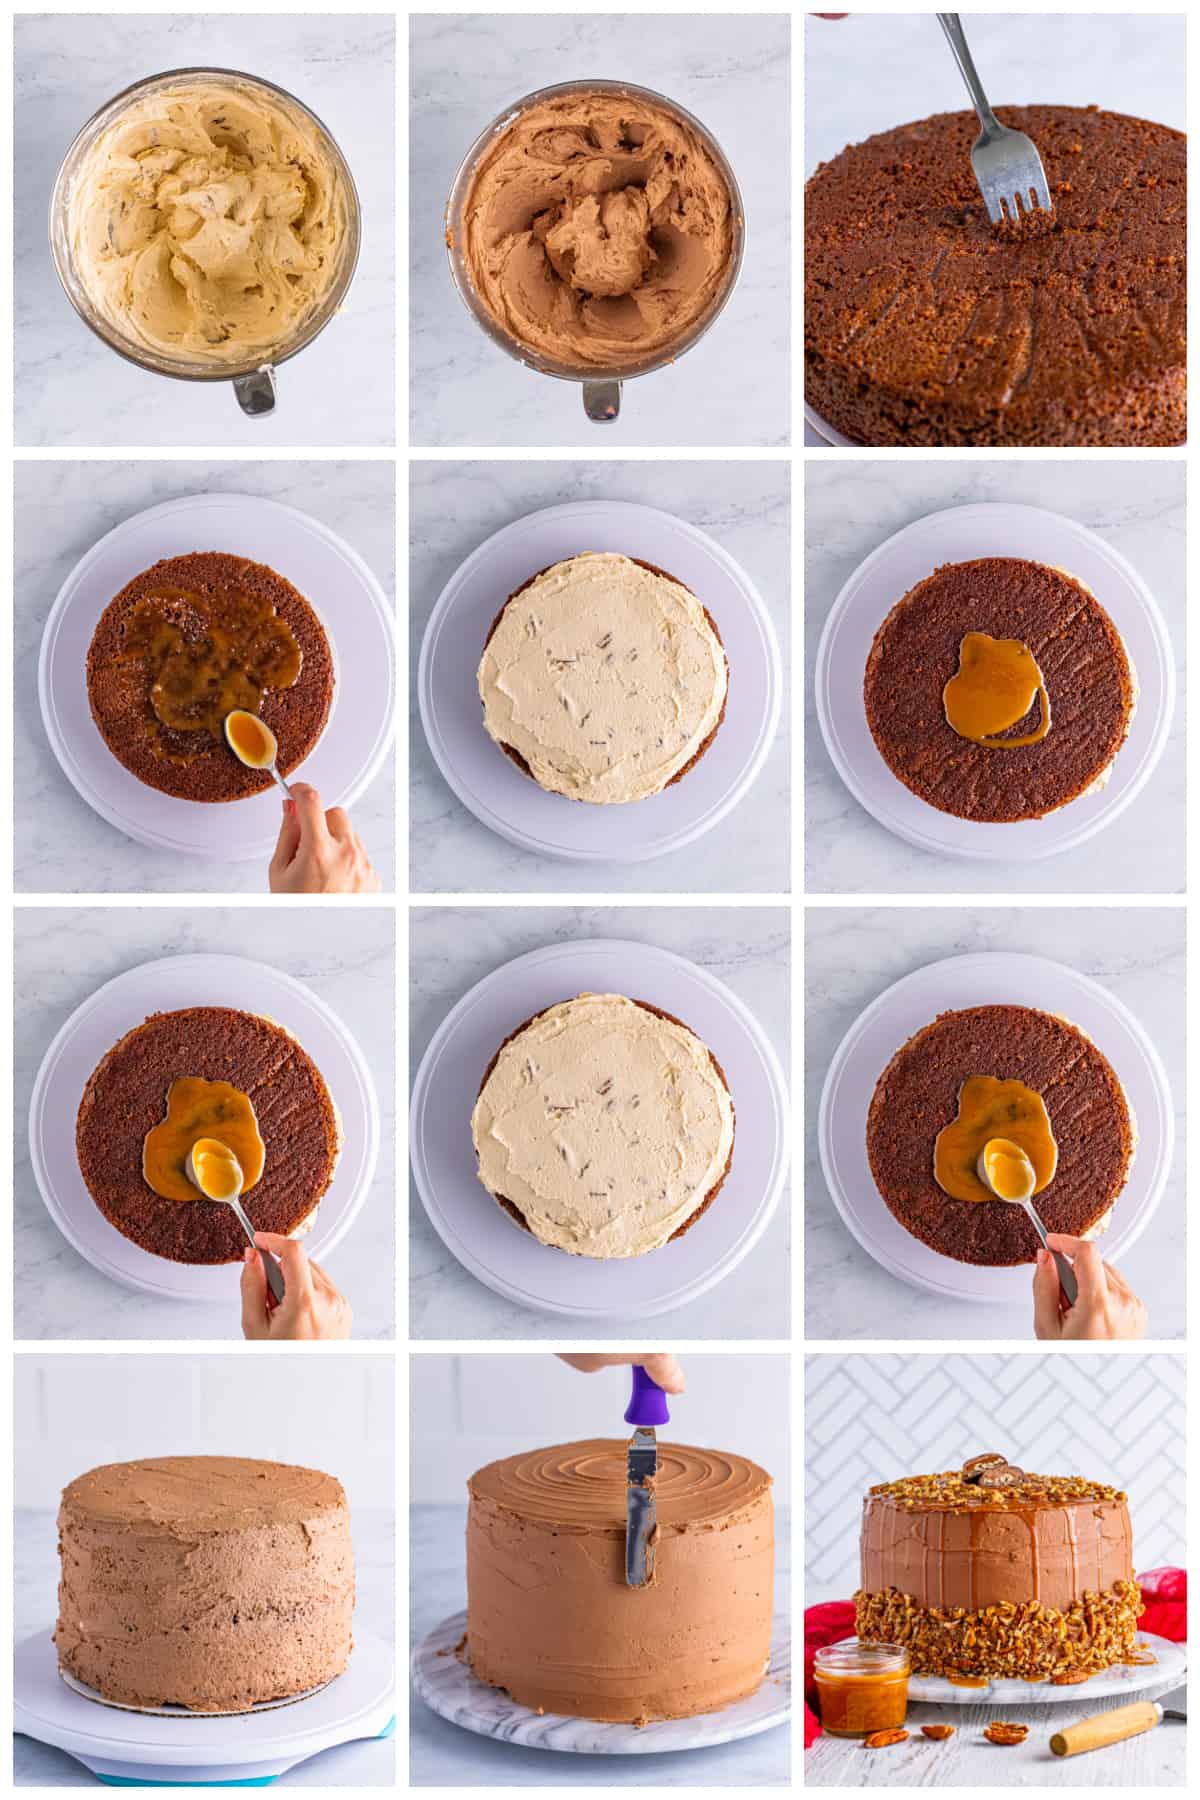 Step by step photo on how to make the frosting and assemble a Turtle Cake.